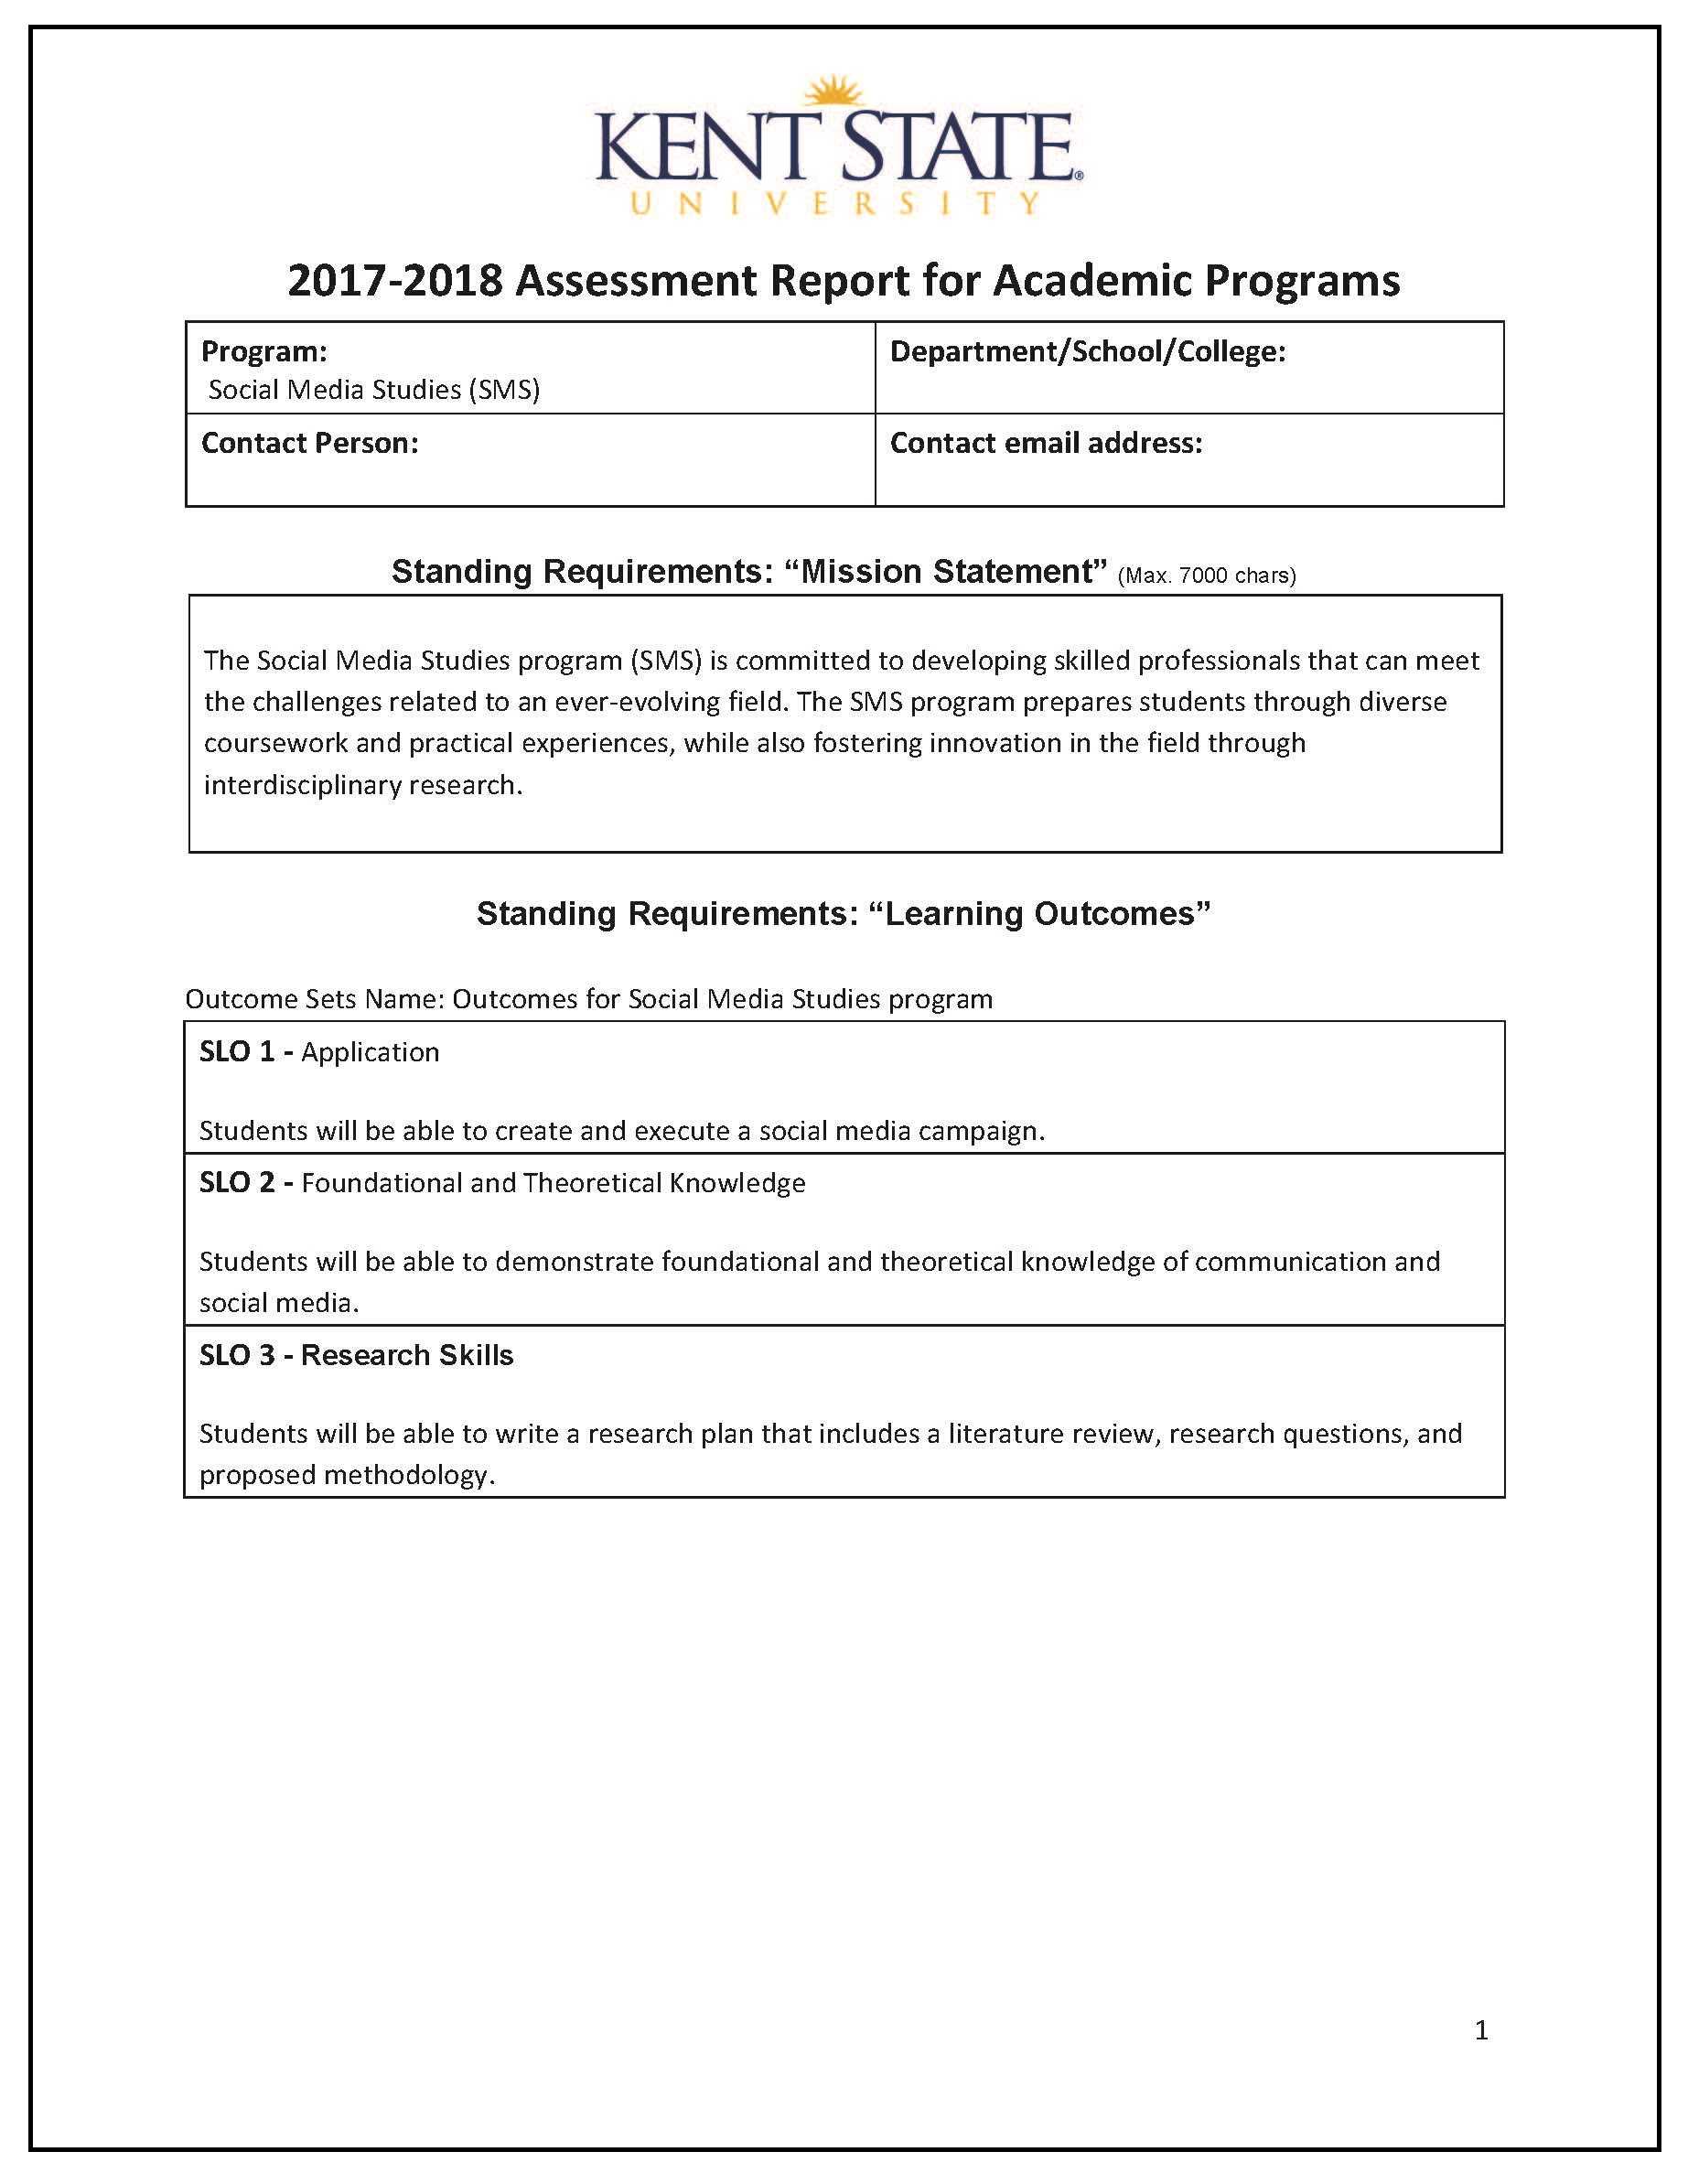 Assessment Report Sample | Accreditation, Assessment And In State Report Template